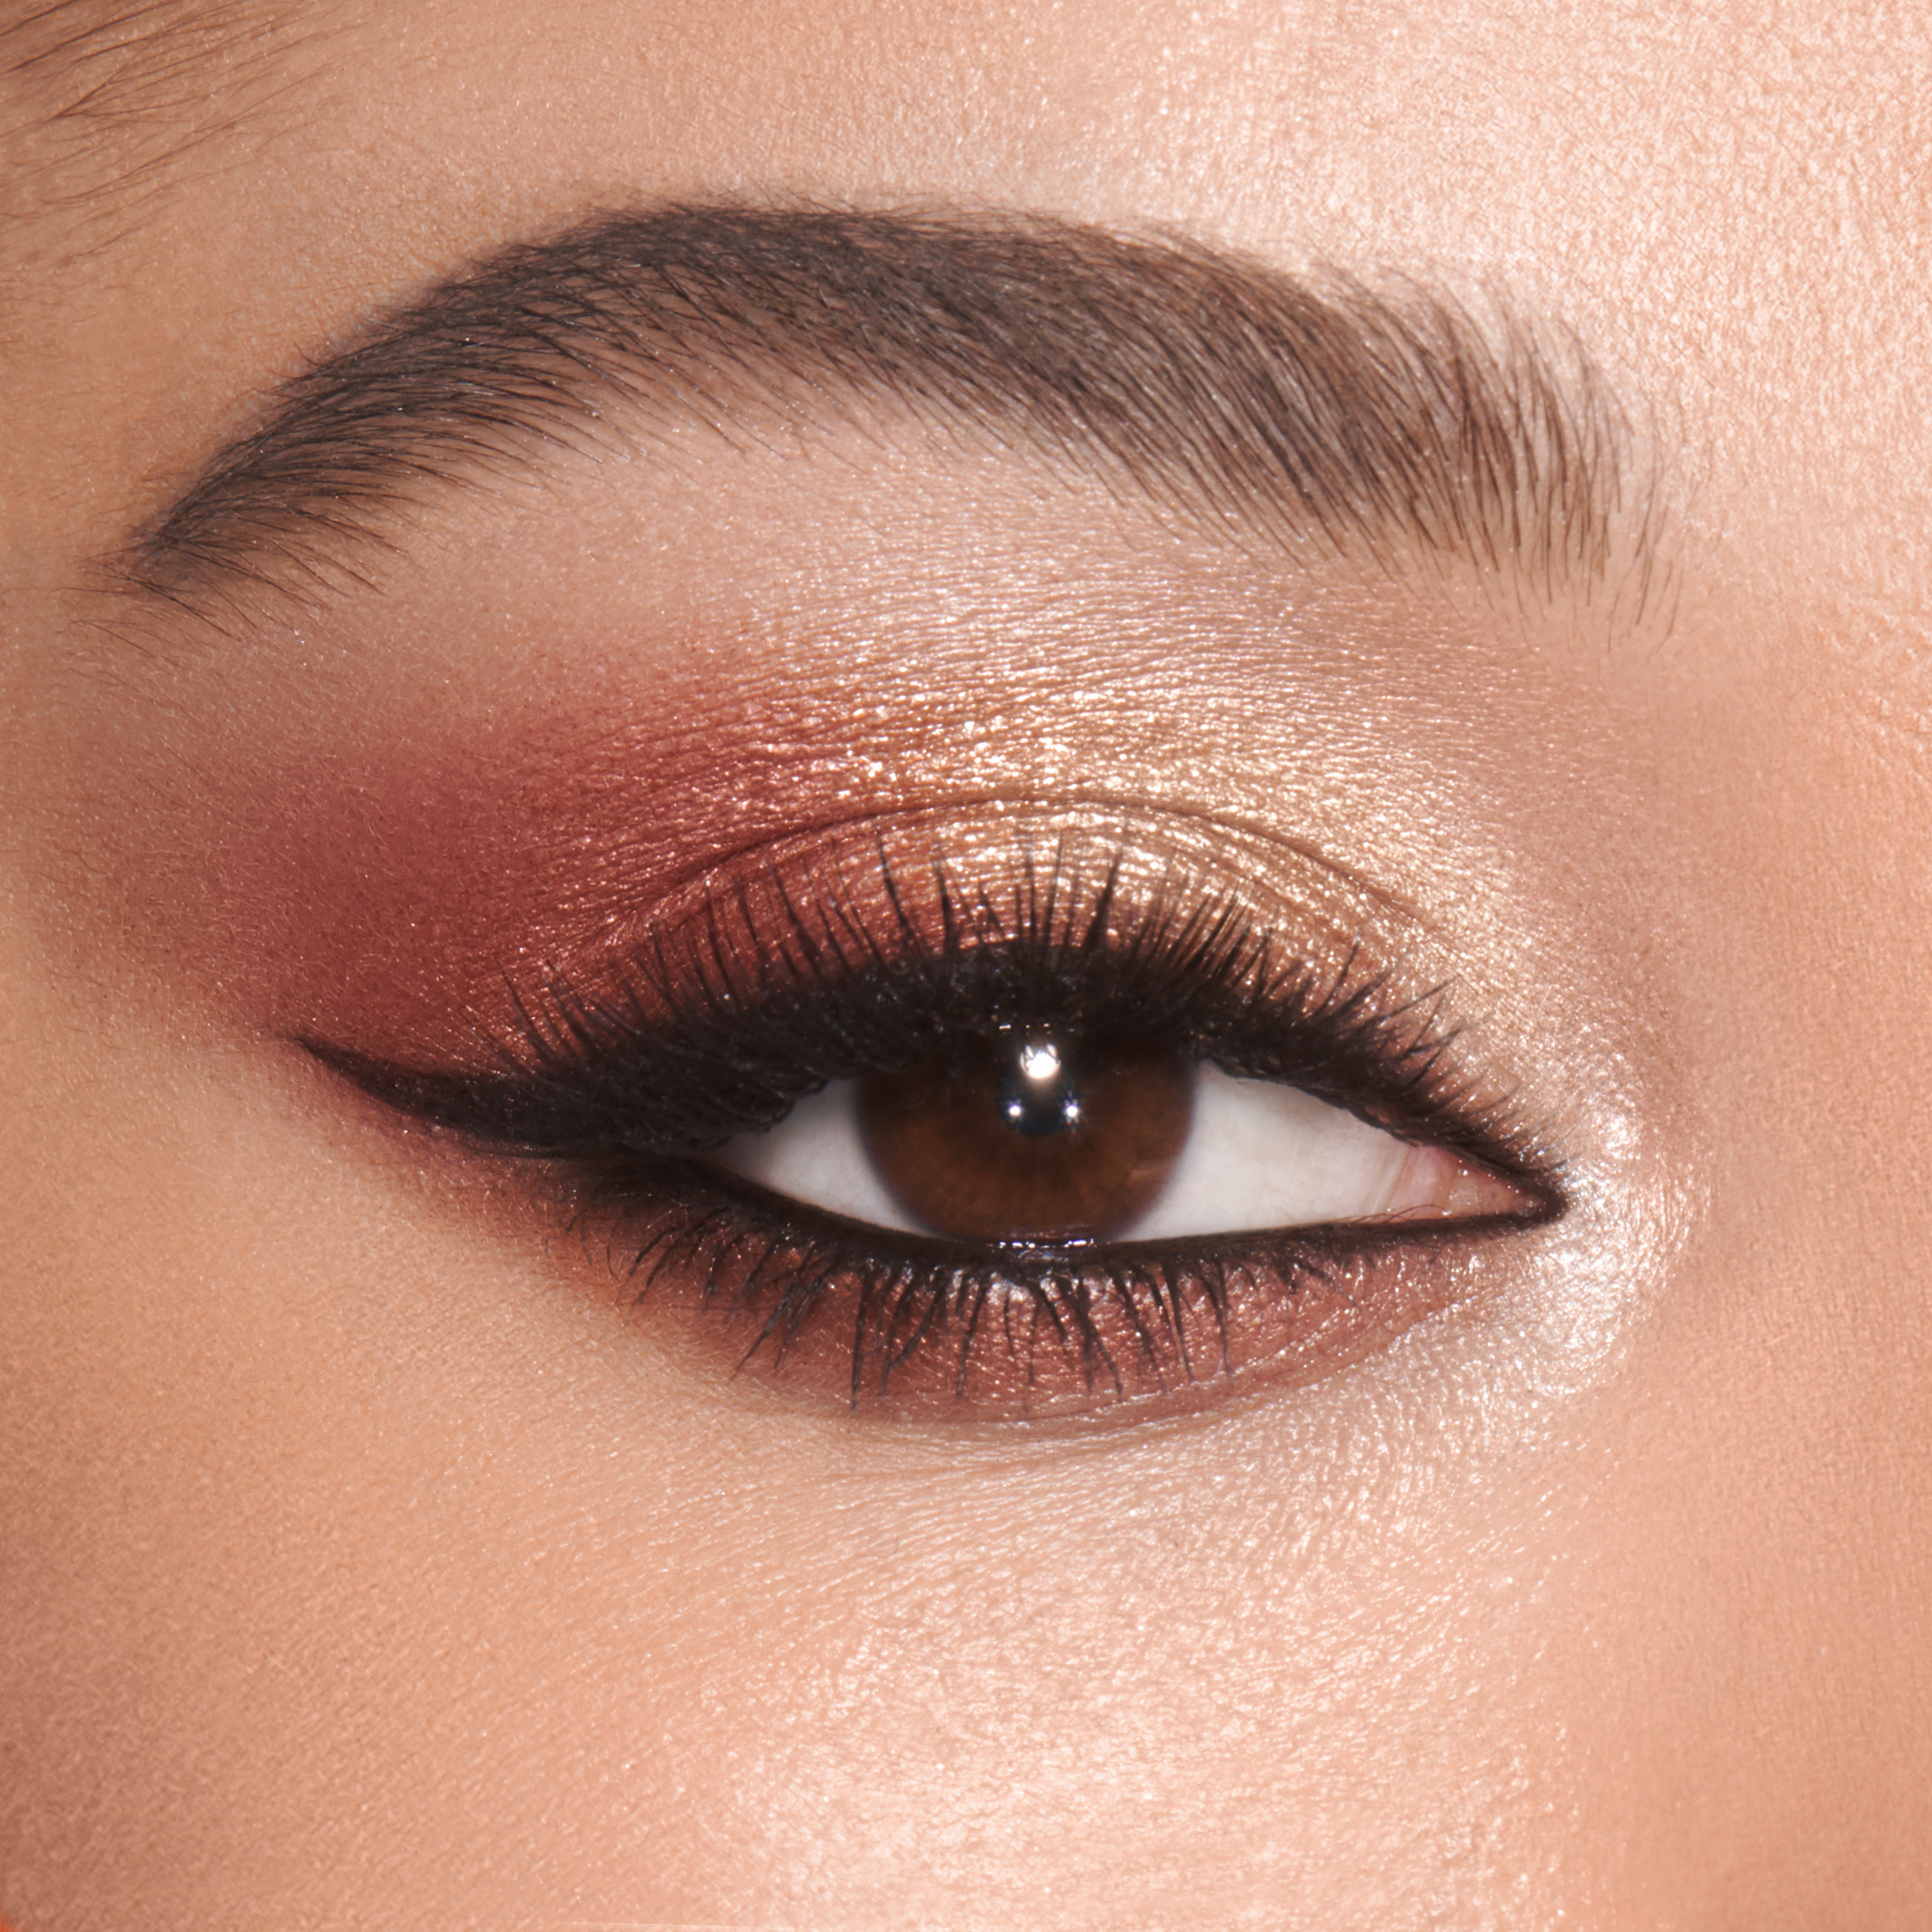 Model eye close up wearing The Bella Sofia Luxury Palette following Charlotte's guide to eyeshadow looks step by step